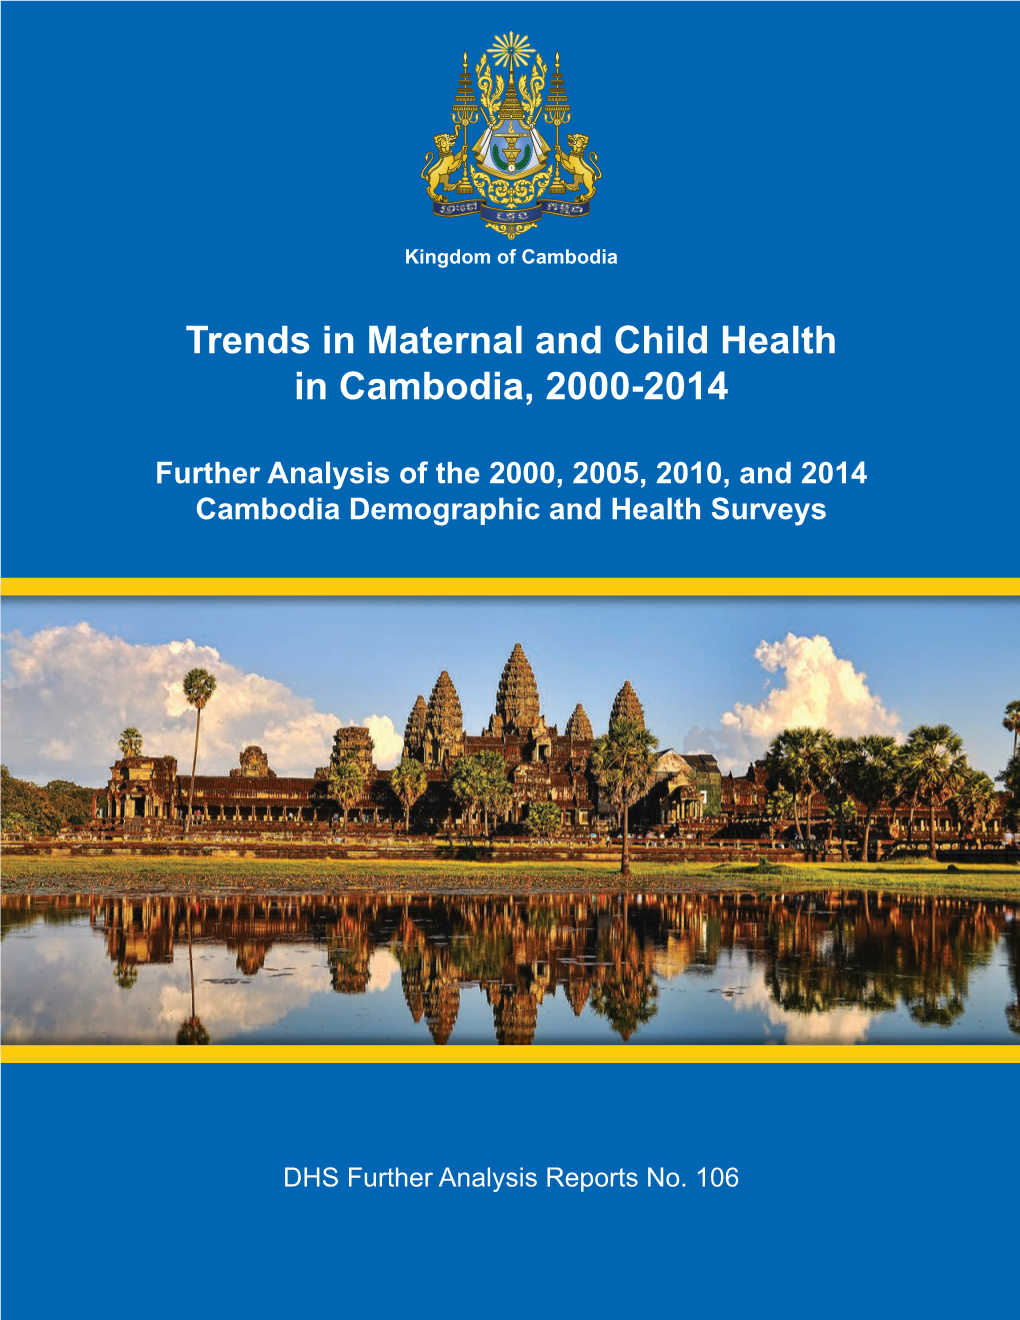 Trends in Maternal and Child Health in Cambodia, 2000-2014 [FA106]